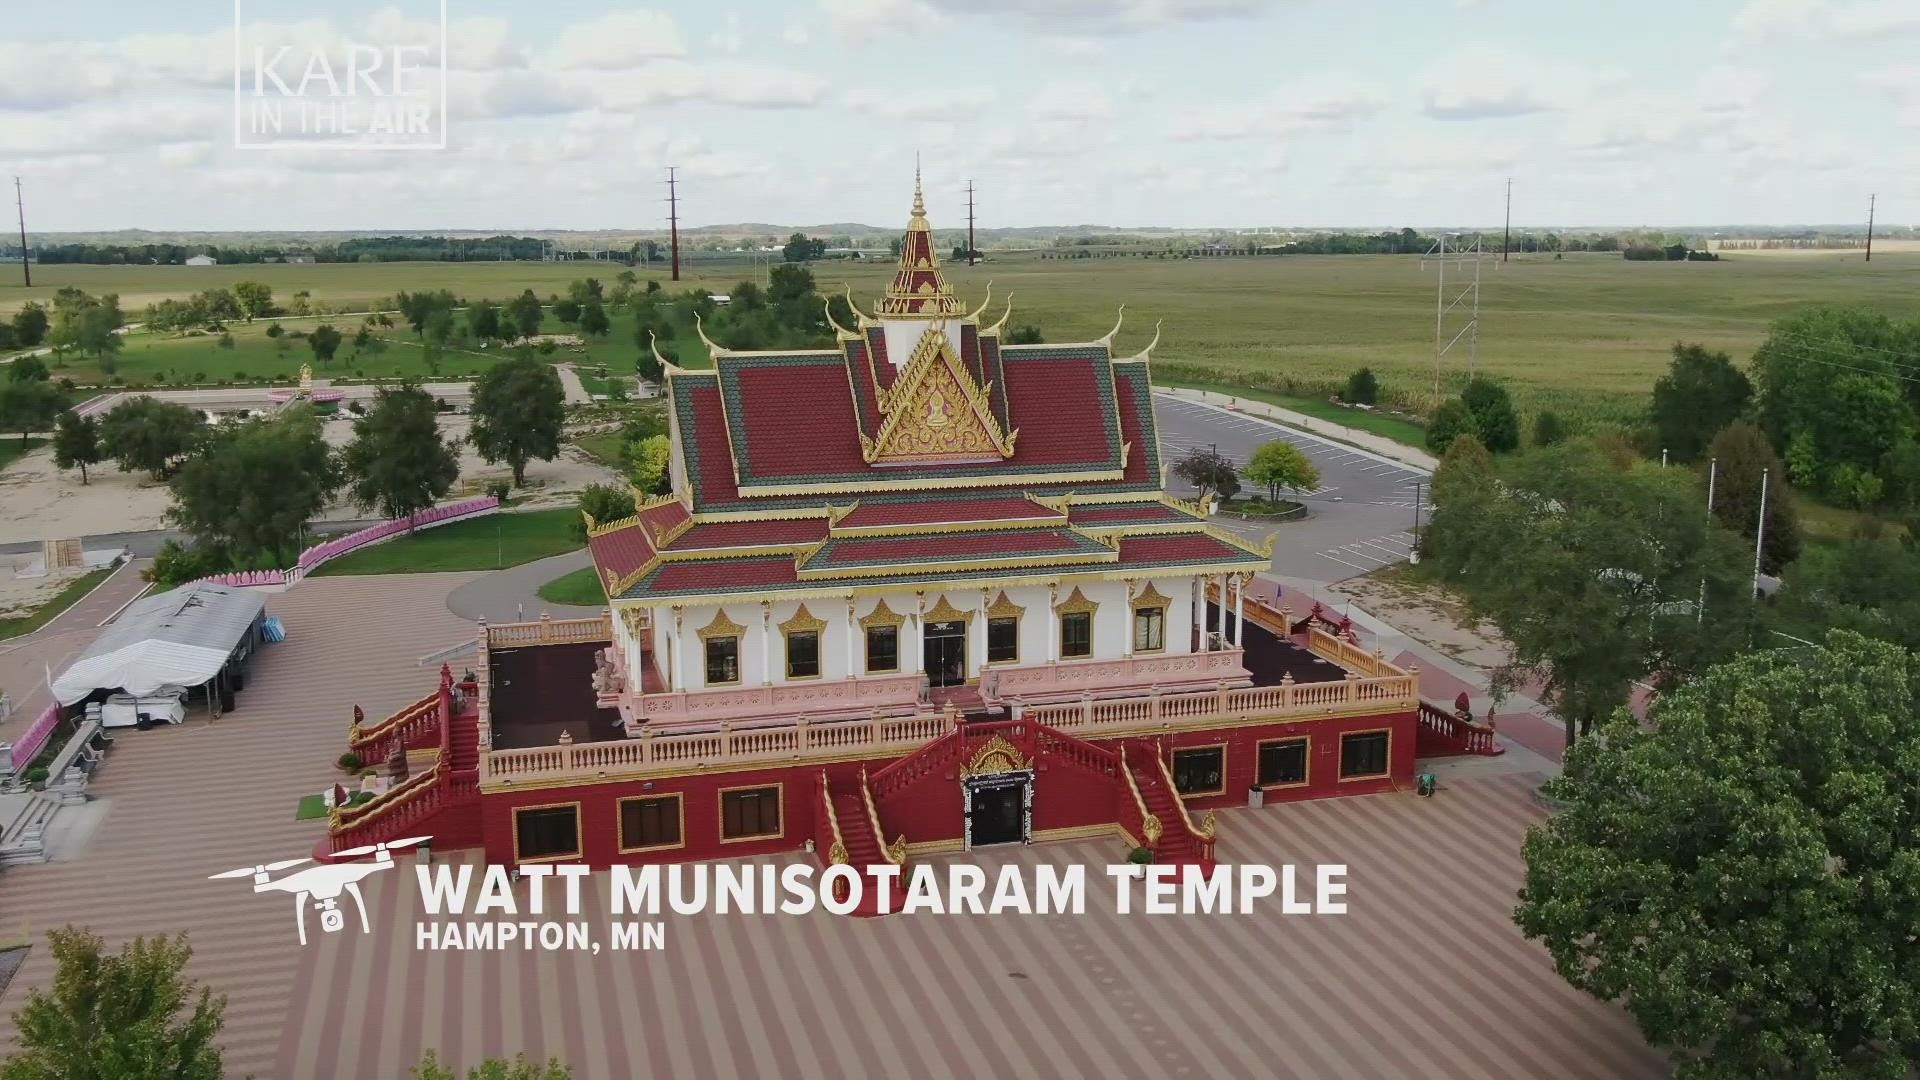 It is one of those things you don't expect to see on a small town Minnesota landscape... a spectacular Buddhist Temple looming above the cornfields near Hampton.